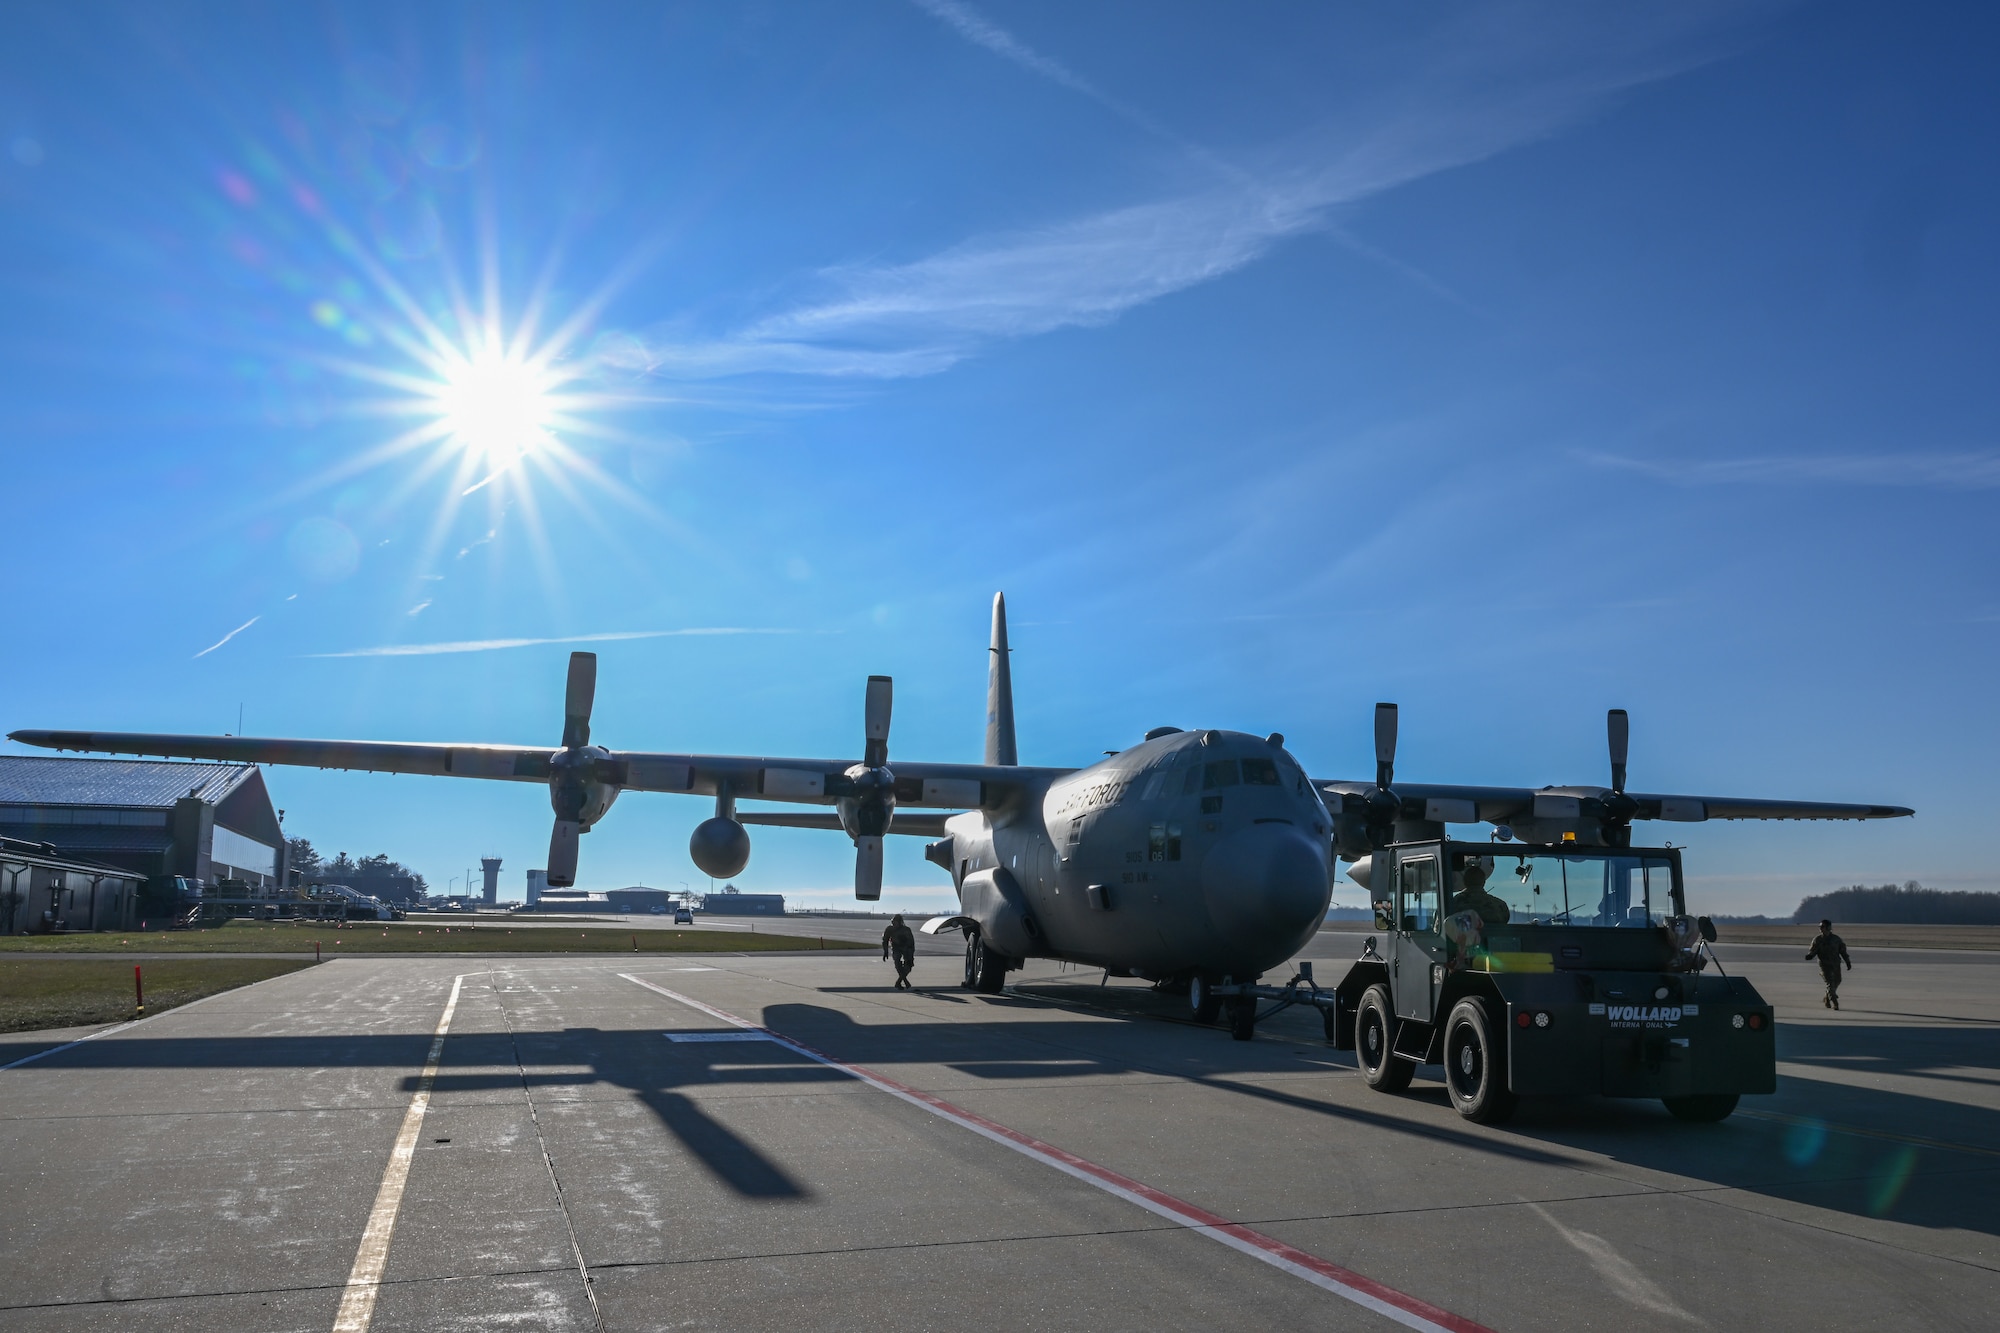 Members of the 910th Maintenance Group taxi an aircraft from a maintenance hangar to a parking spot on the aircraft ramp to begin pre-flight preparations, Jan. 31, 2024, at Youngstown Air Reserve Station, Ohio.